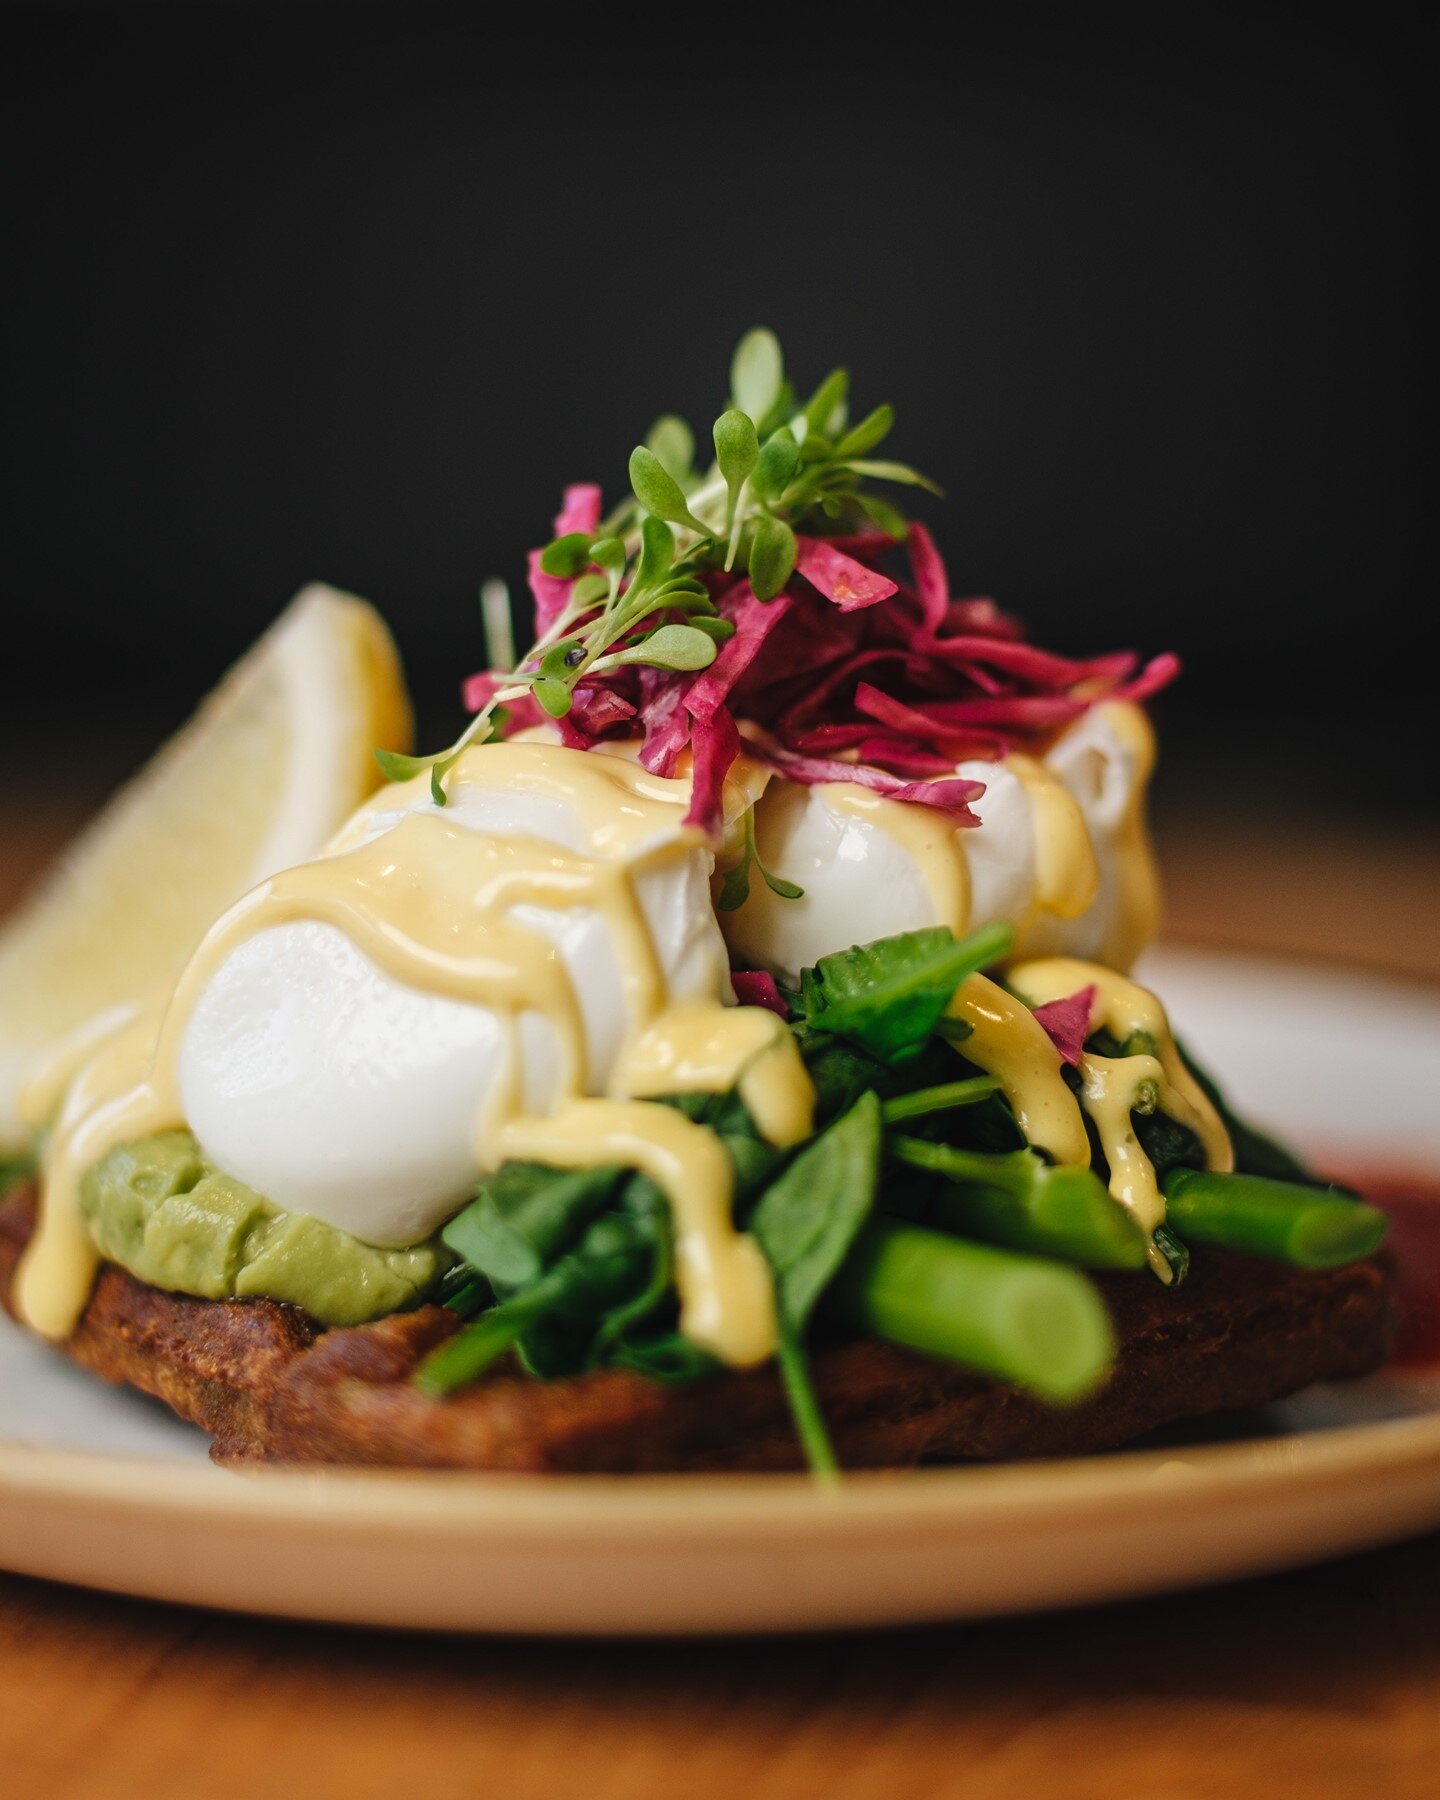 We bet you've never had a Smashed Avo before that looked this good? The colours in this dish make it look so inviting. I'm feeling hungry just looking at it!

Have you got a breakfast favourite that you just can't say no to? Nothing gets my mouth wat